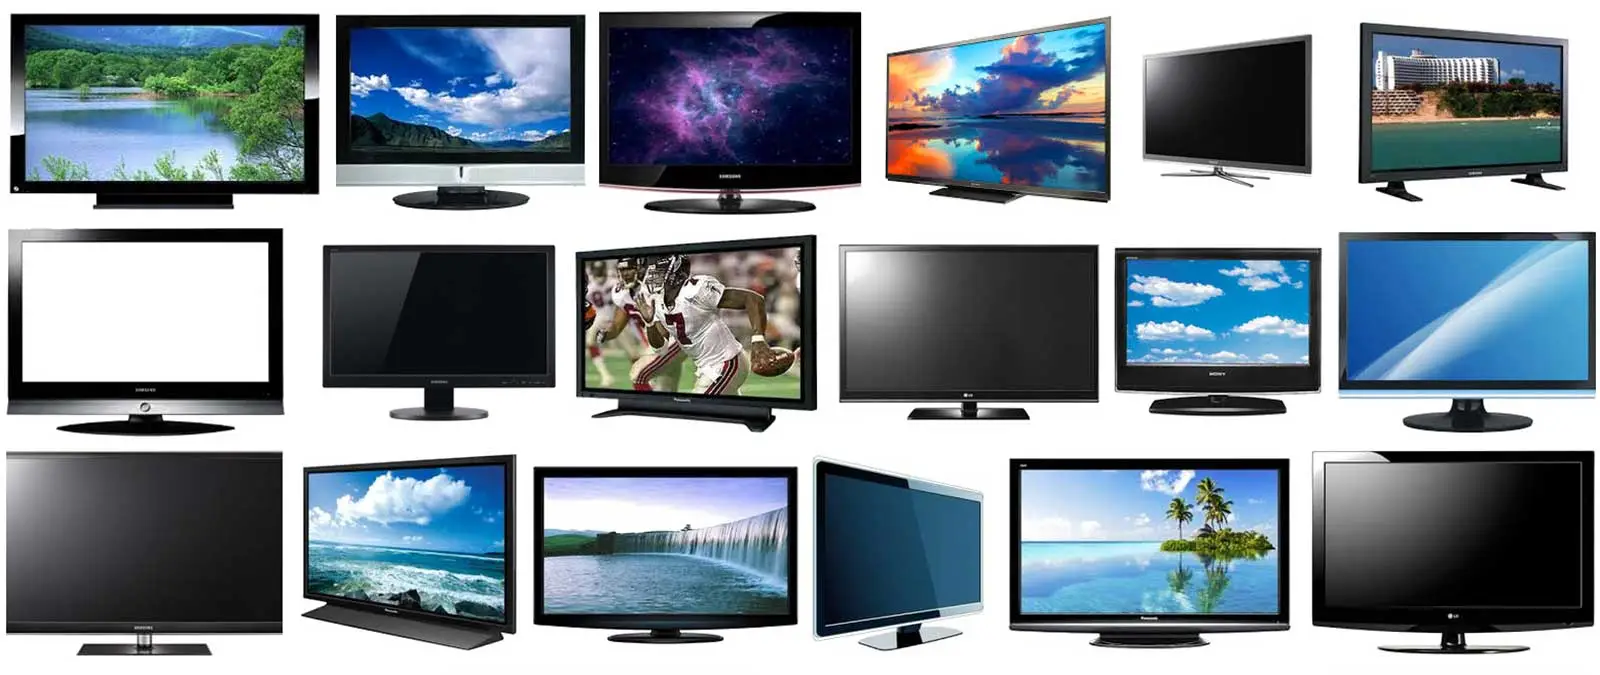 Different types of TVs